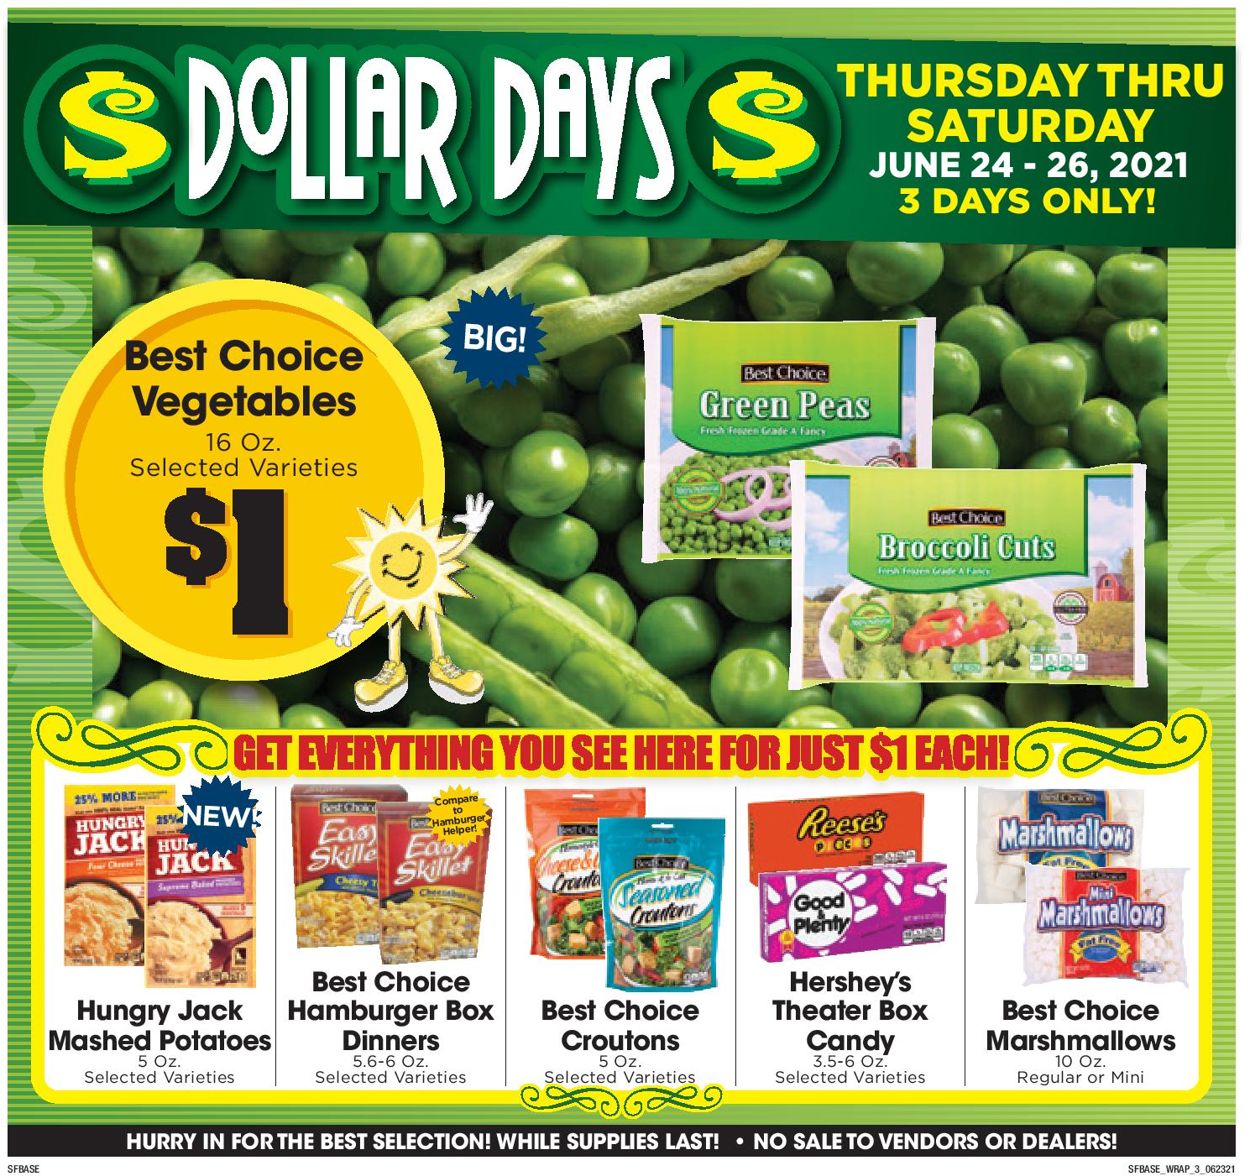 Sunshine Foods Ad from 06/23/2021